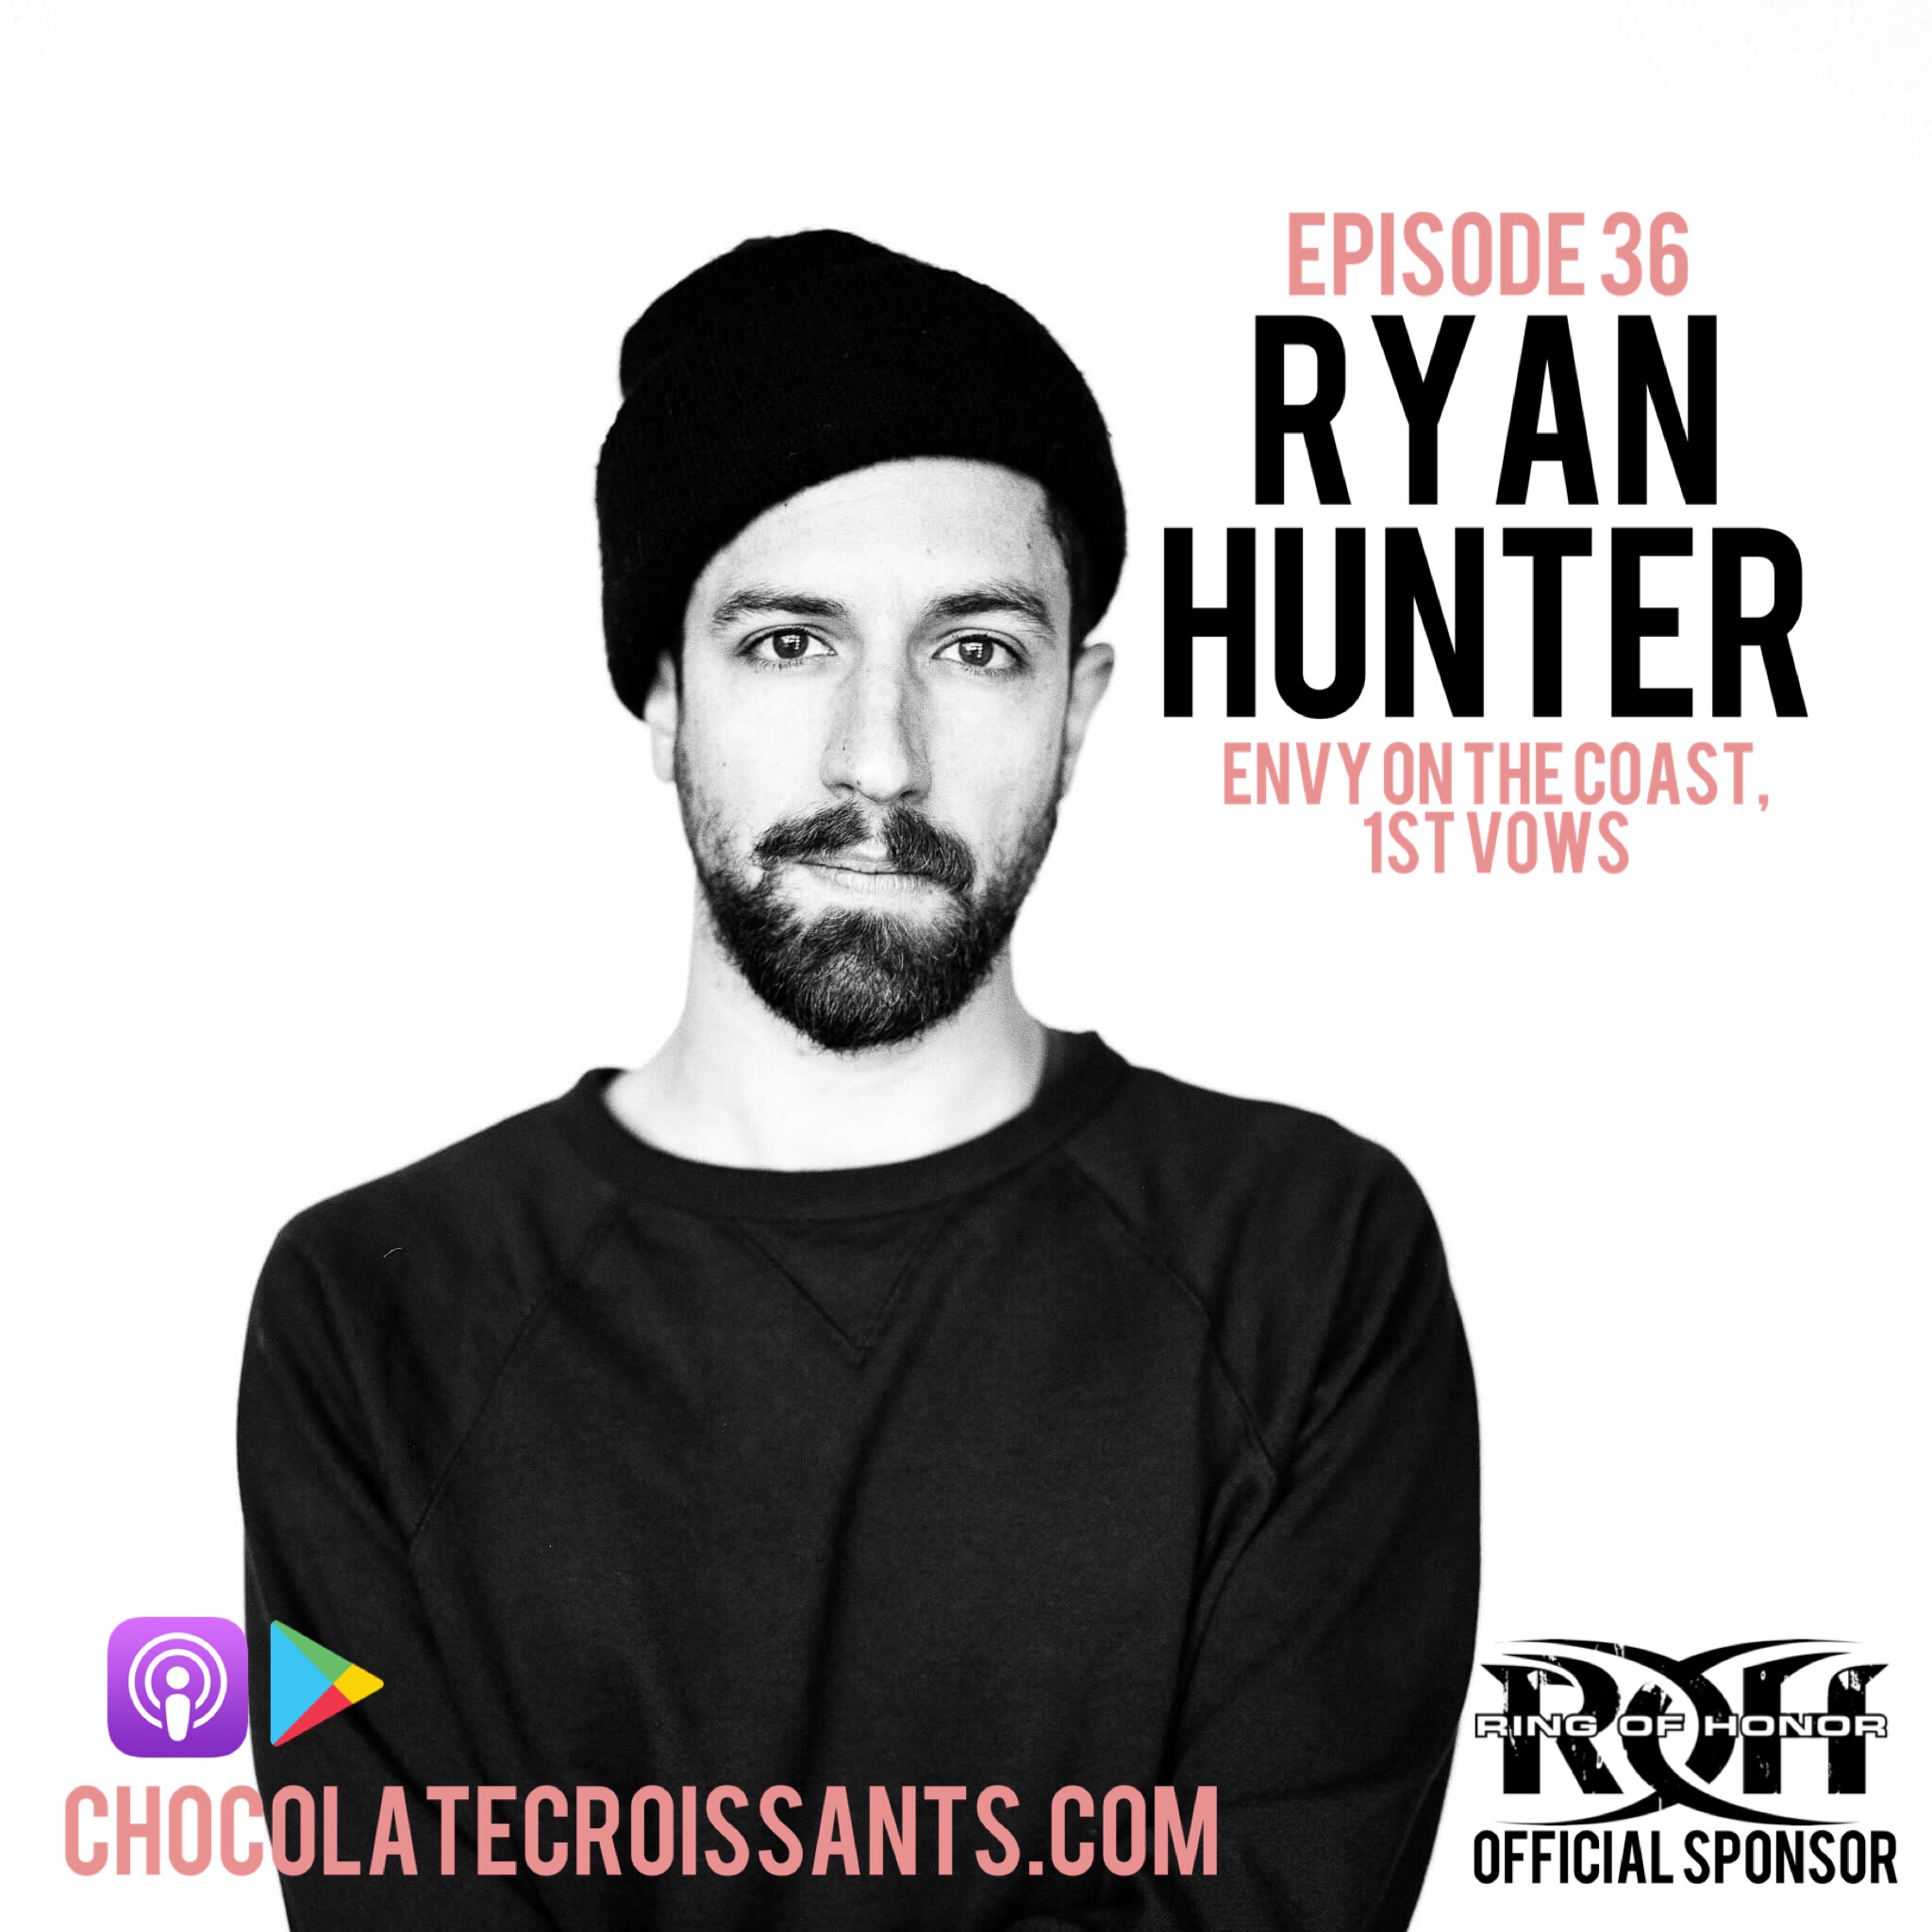 Episode 36: Ryan Hunter (Envy On The Coast, 1st VOWS)